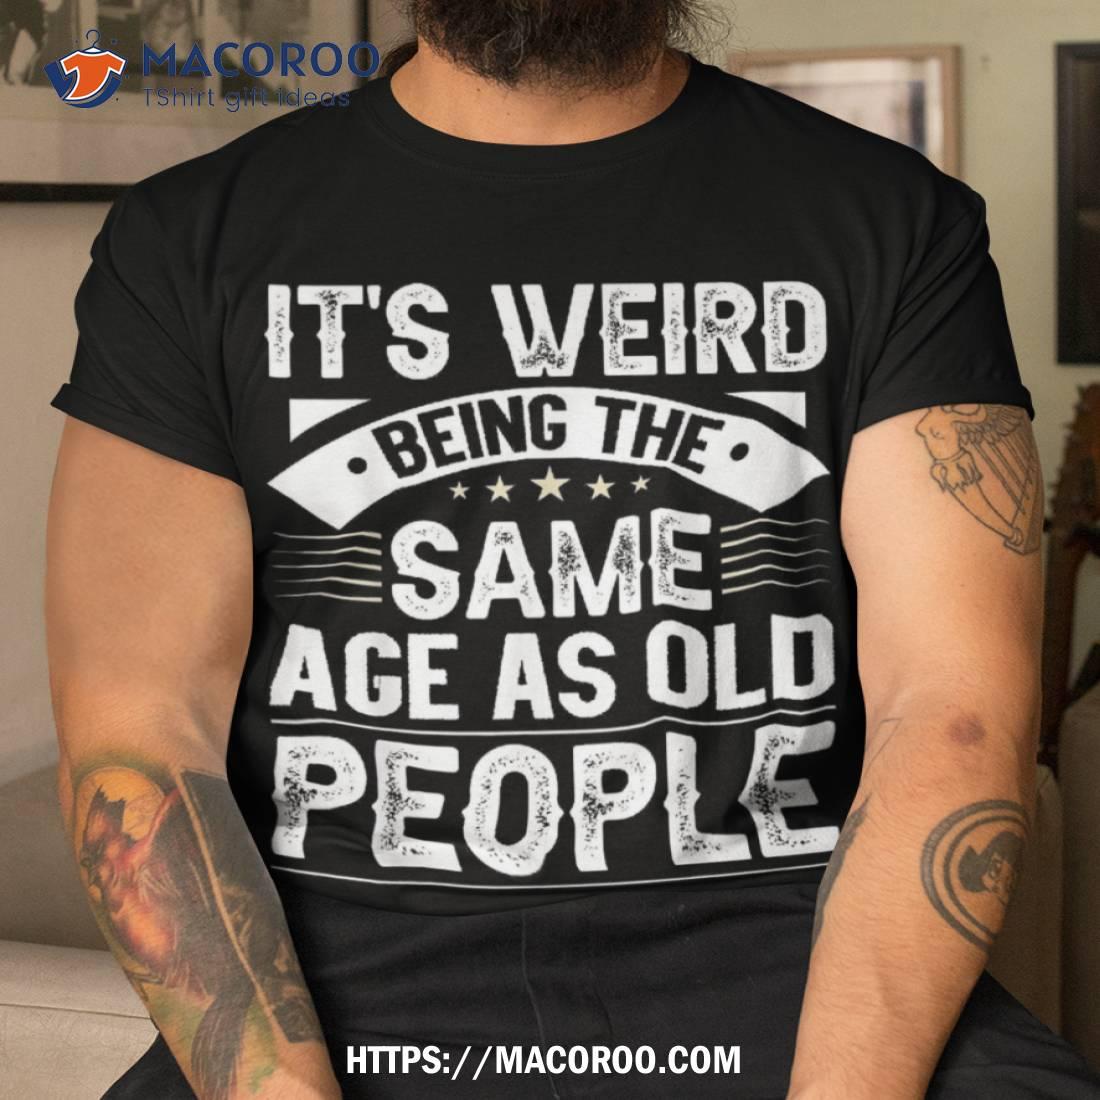 https://images.macoroo.com/wp-content/uploads/2023/08/it-s-weird-being-the-same-age-as-old-people-retro-shirt-cool-fathers-day-gifts-tshirt.jpg